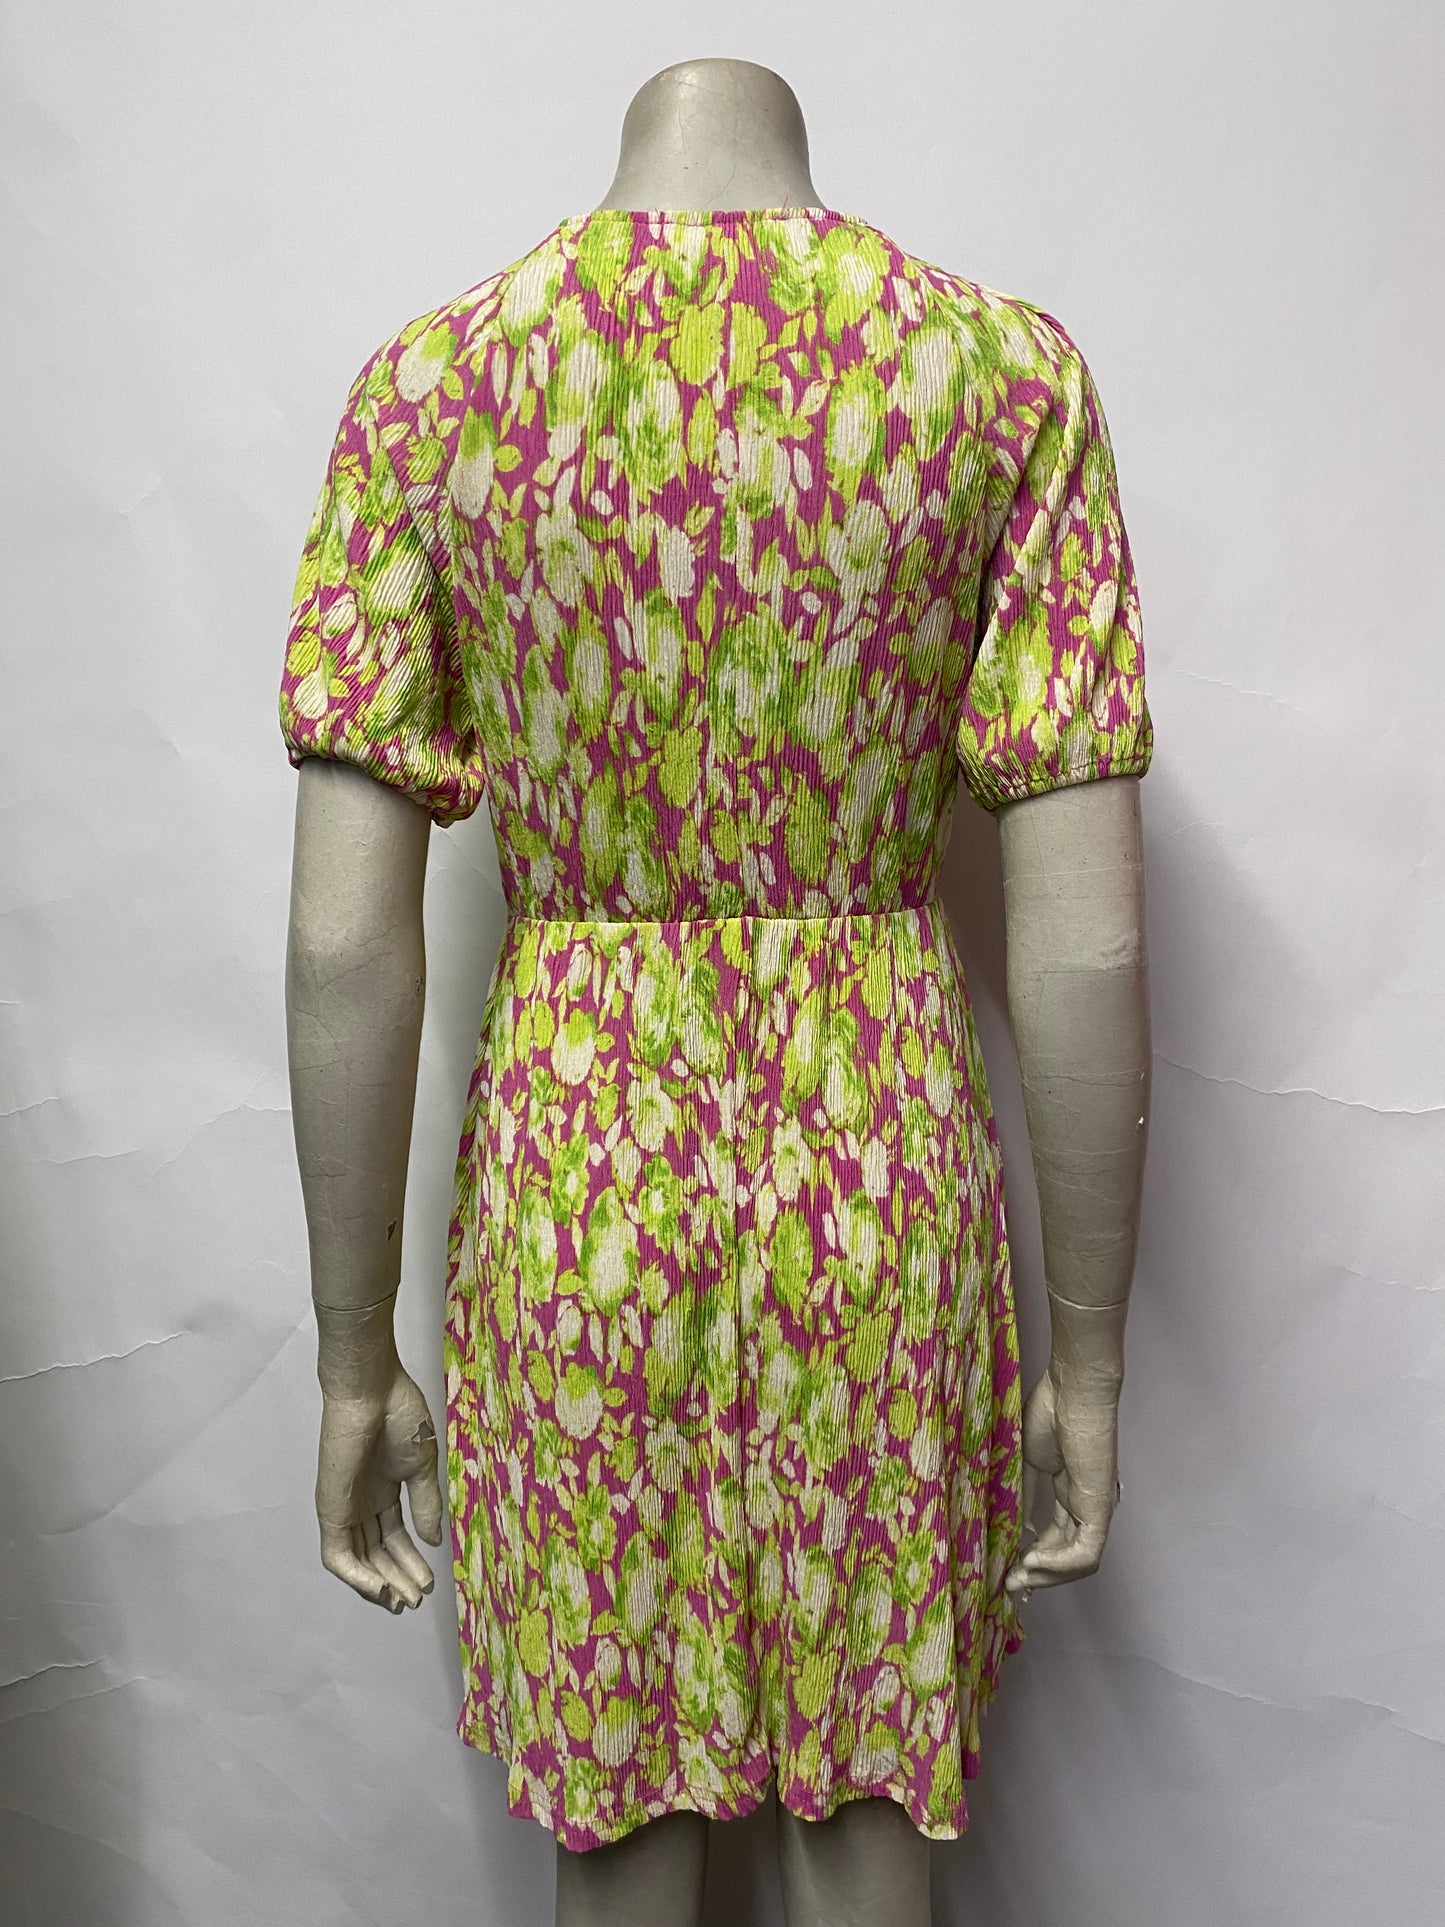 Mango Green and Pink Patterned Summer Dress Small